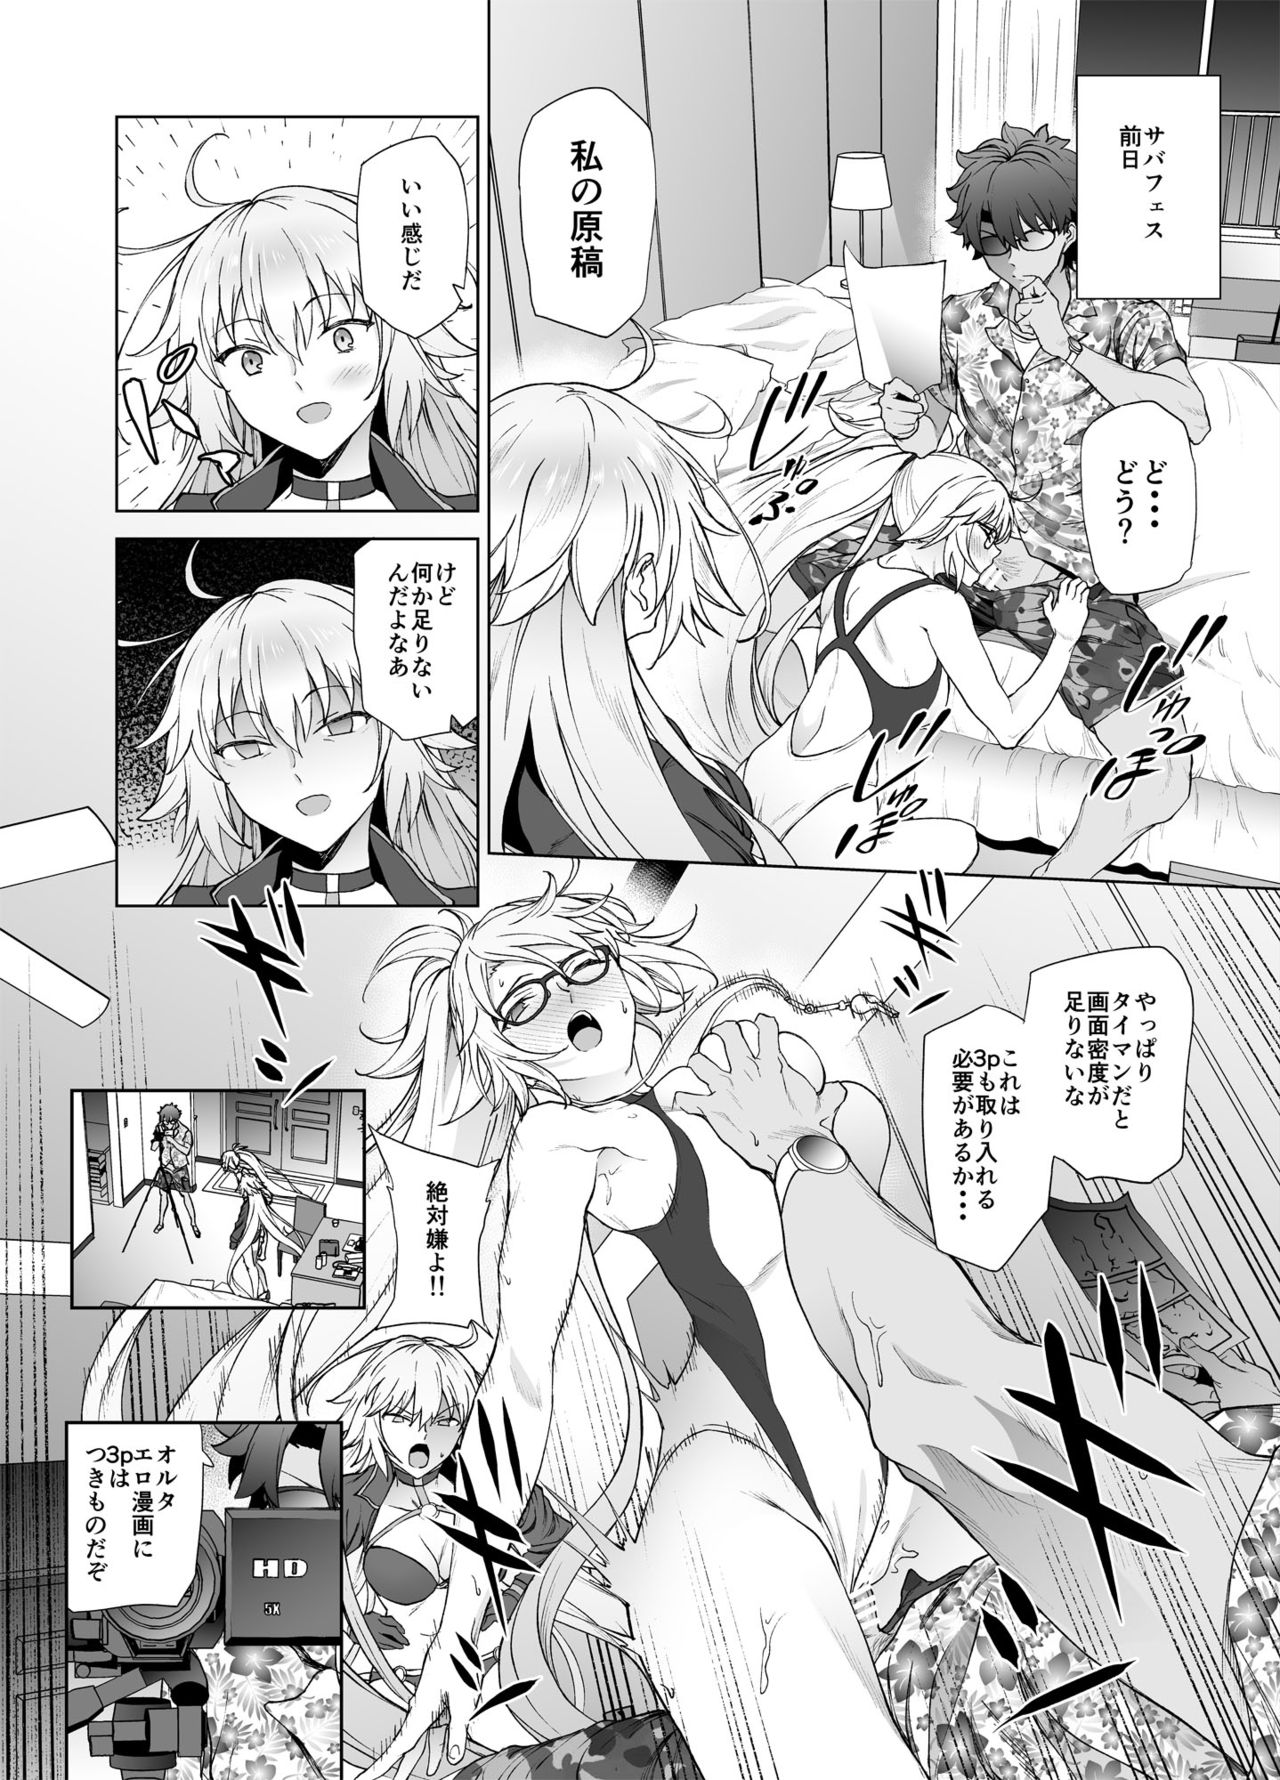 [EXTENDED PART (Endo Yoshiki)] Jeanne W (Fate/Grand Order) [Digital] page 25 full